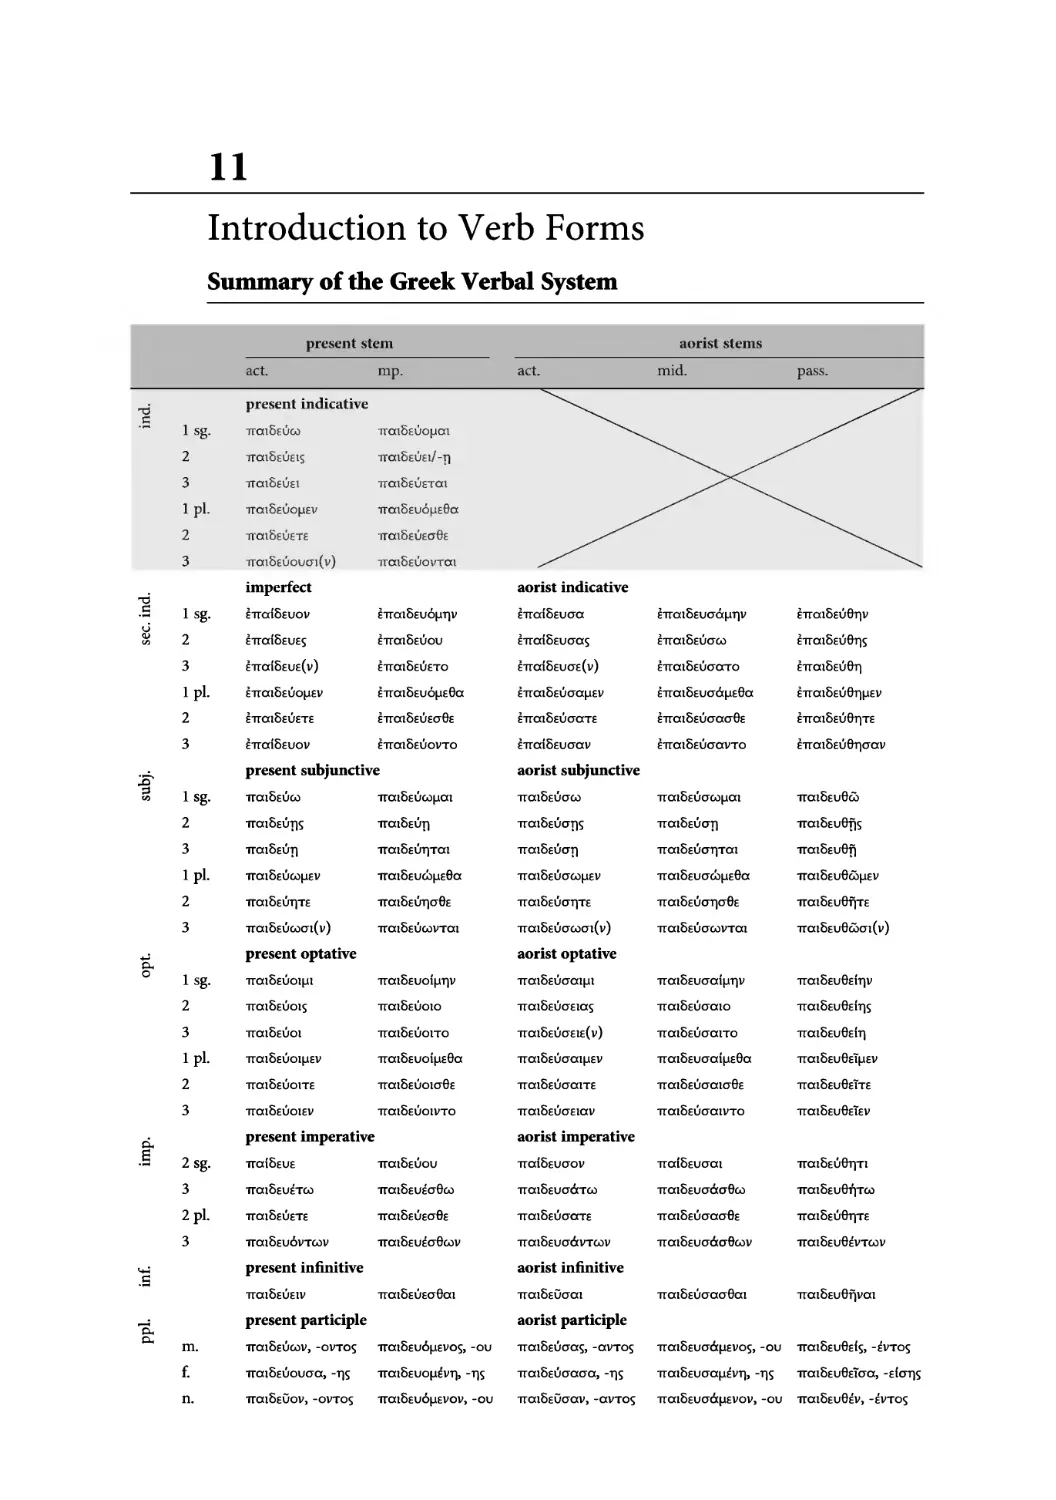 11. Introduction to Verb Forms